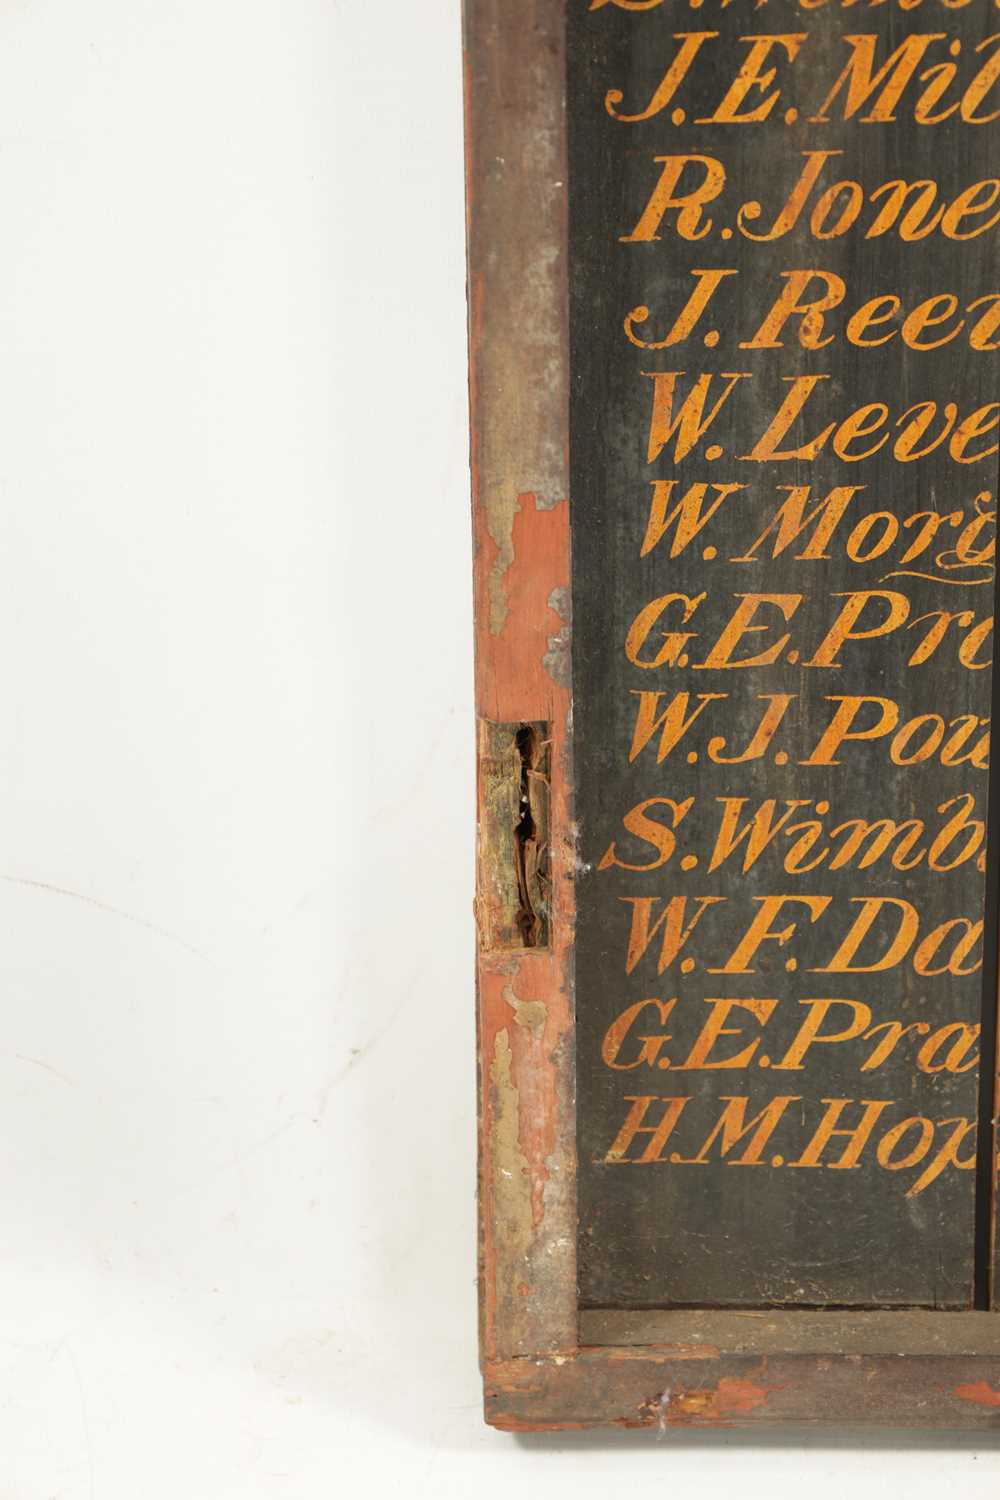 A 19TH CENTURY MASONIC SIGN “THE LOYAL PERCY LODGE, NO. 6254” - Image 7 of 9